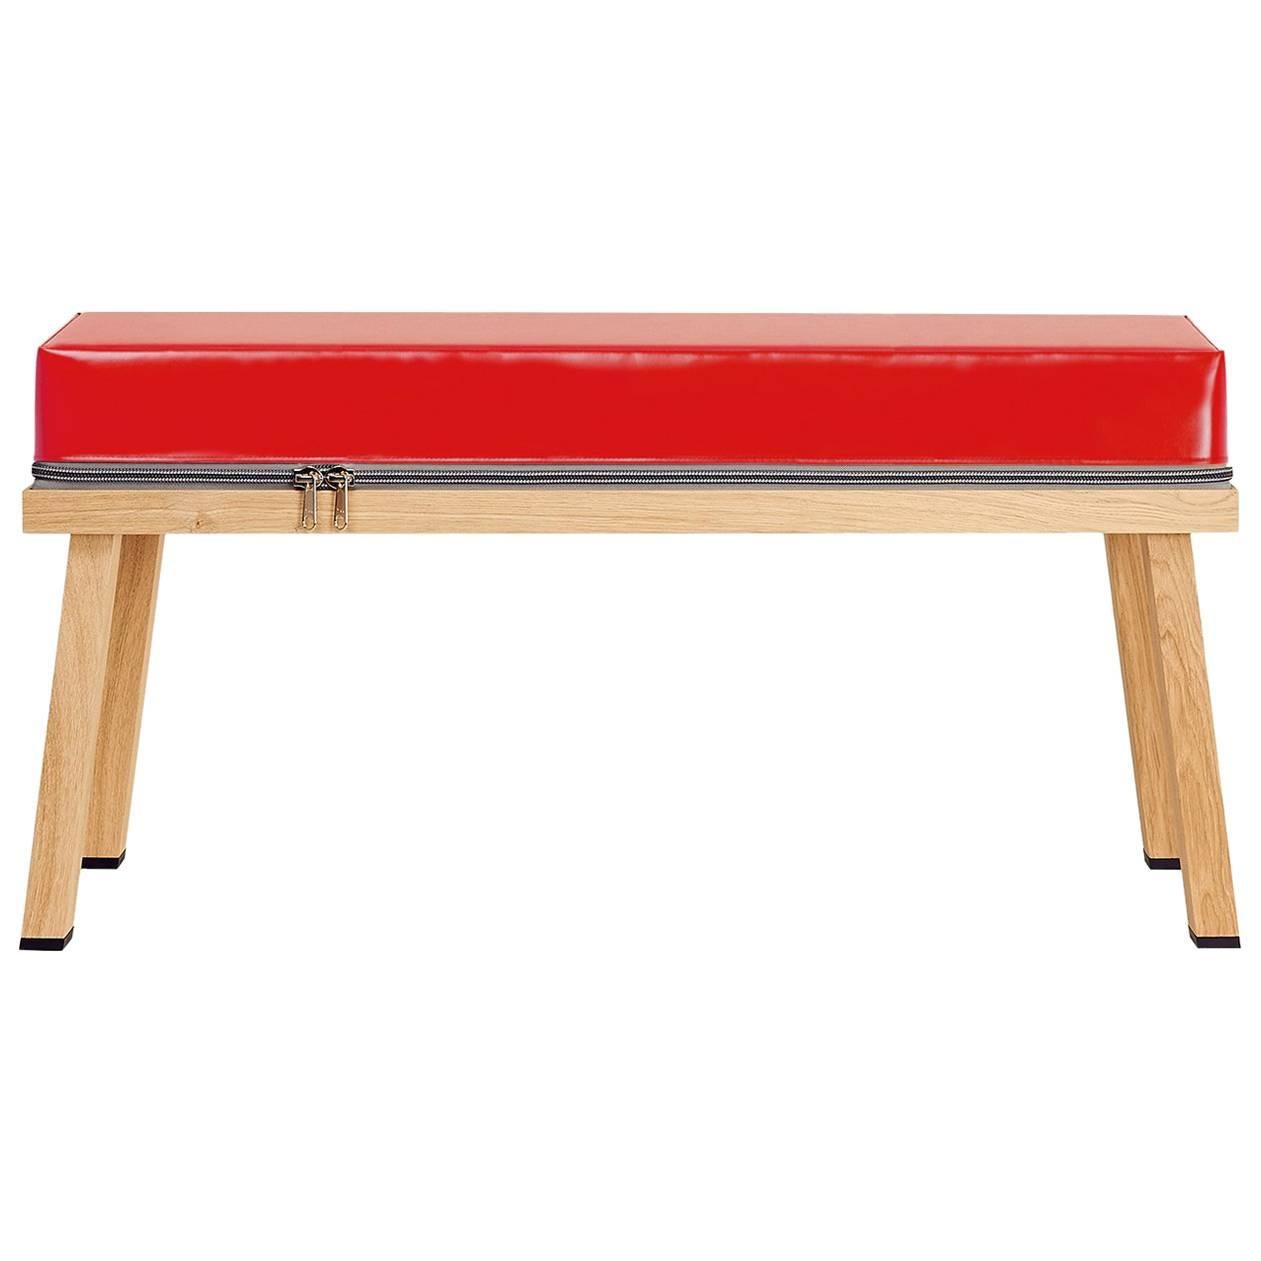 Visser and Meijwaard Truecolors Bench in Red PVC Cloth with Zipper For Sale